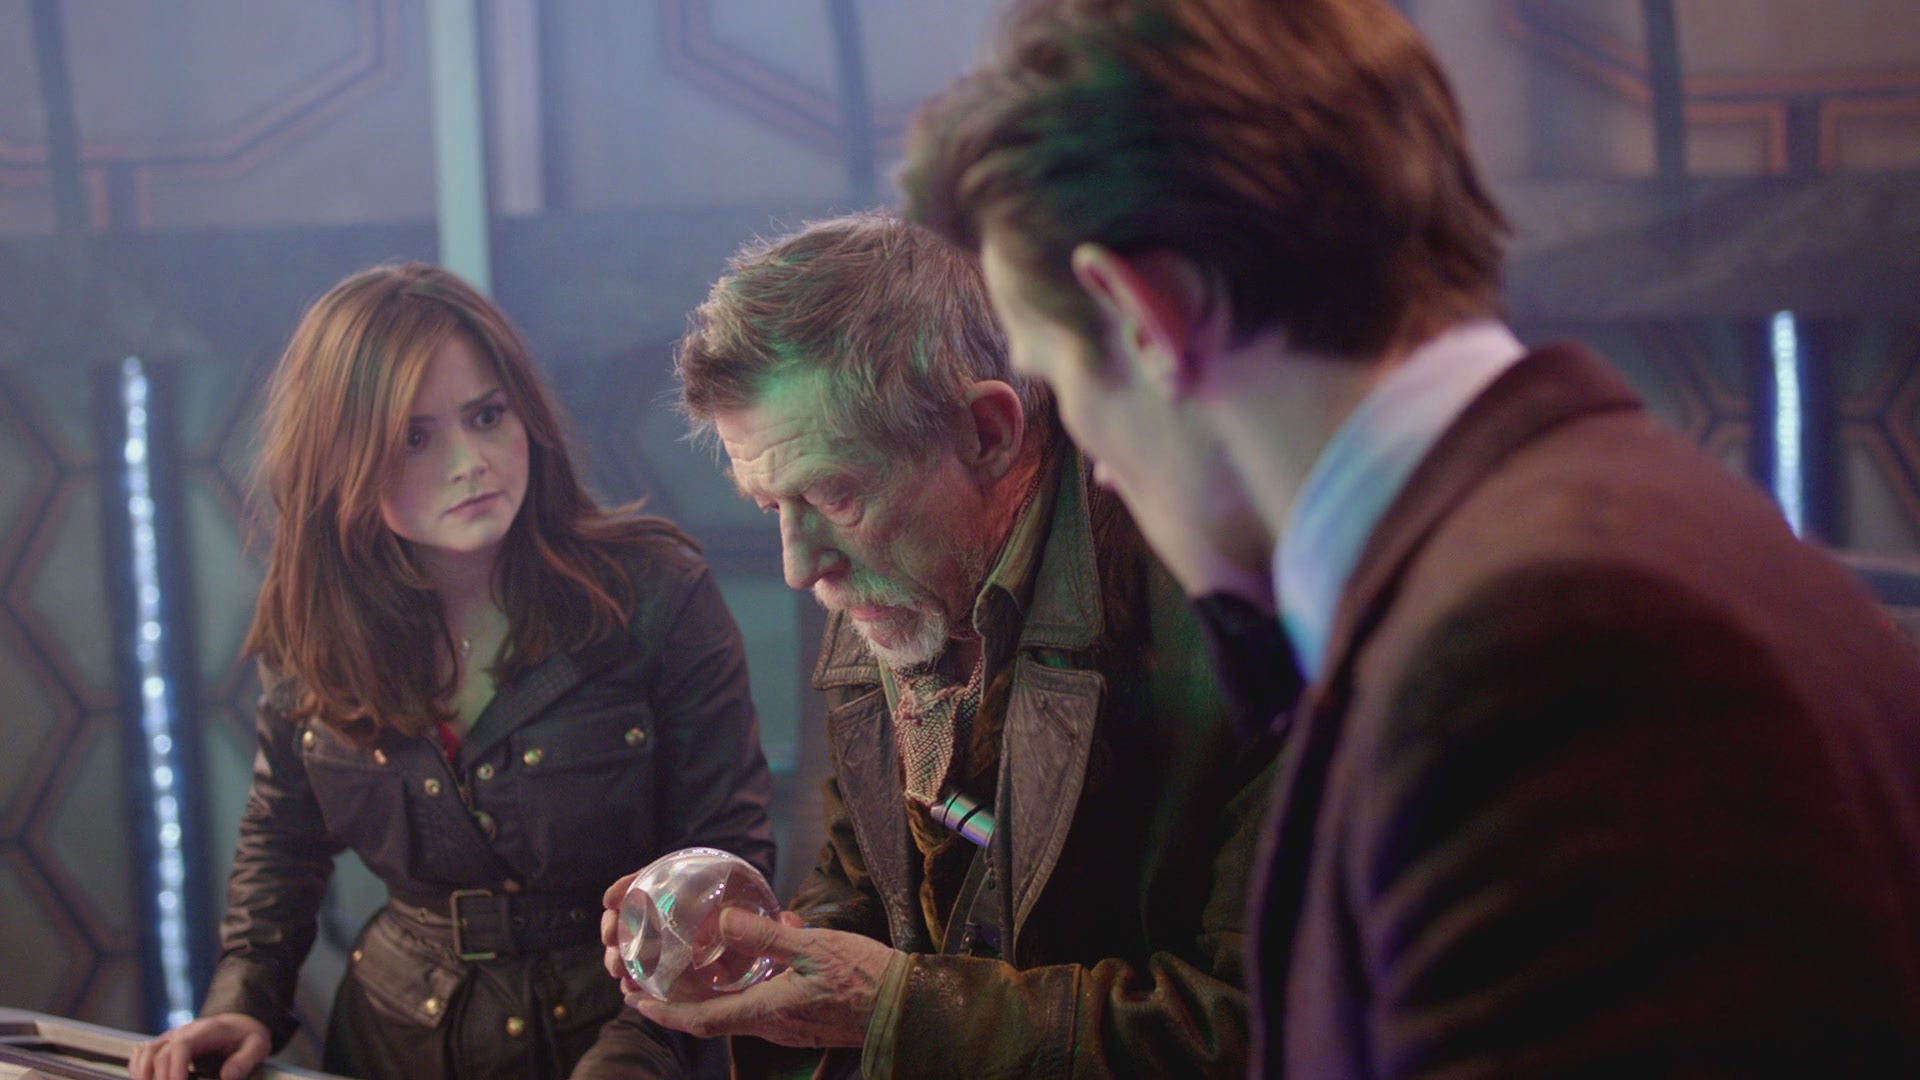 DayOfTheDoctor-Caps-0941.jpg